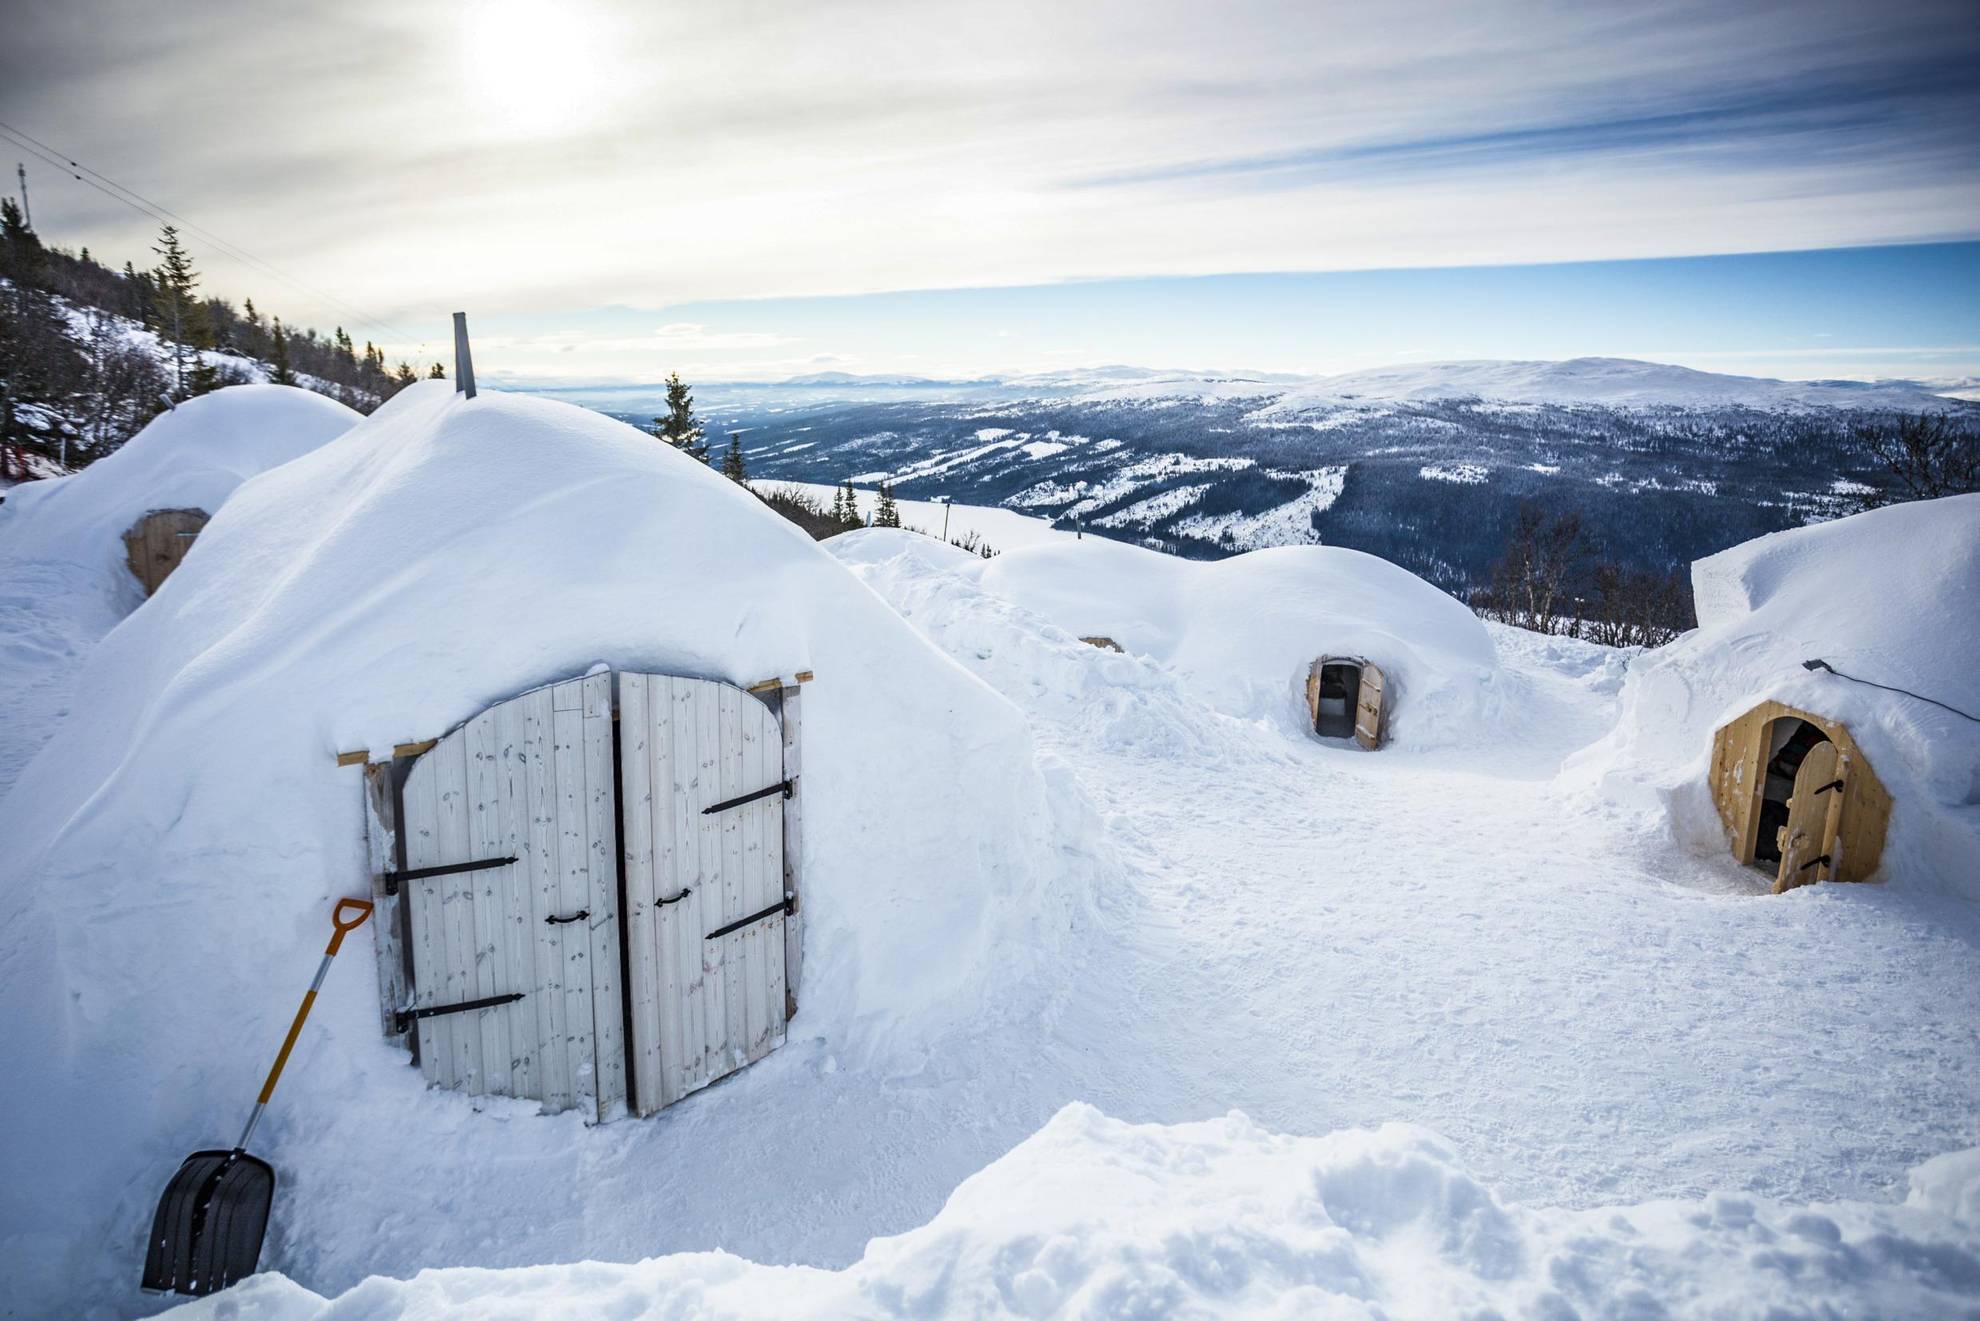 Igloos with small wooden doors are situated on a mountain. A shovel is placed against one of the igloos. In the background is a river, snow-covered mountains, and forest.